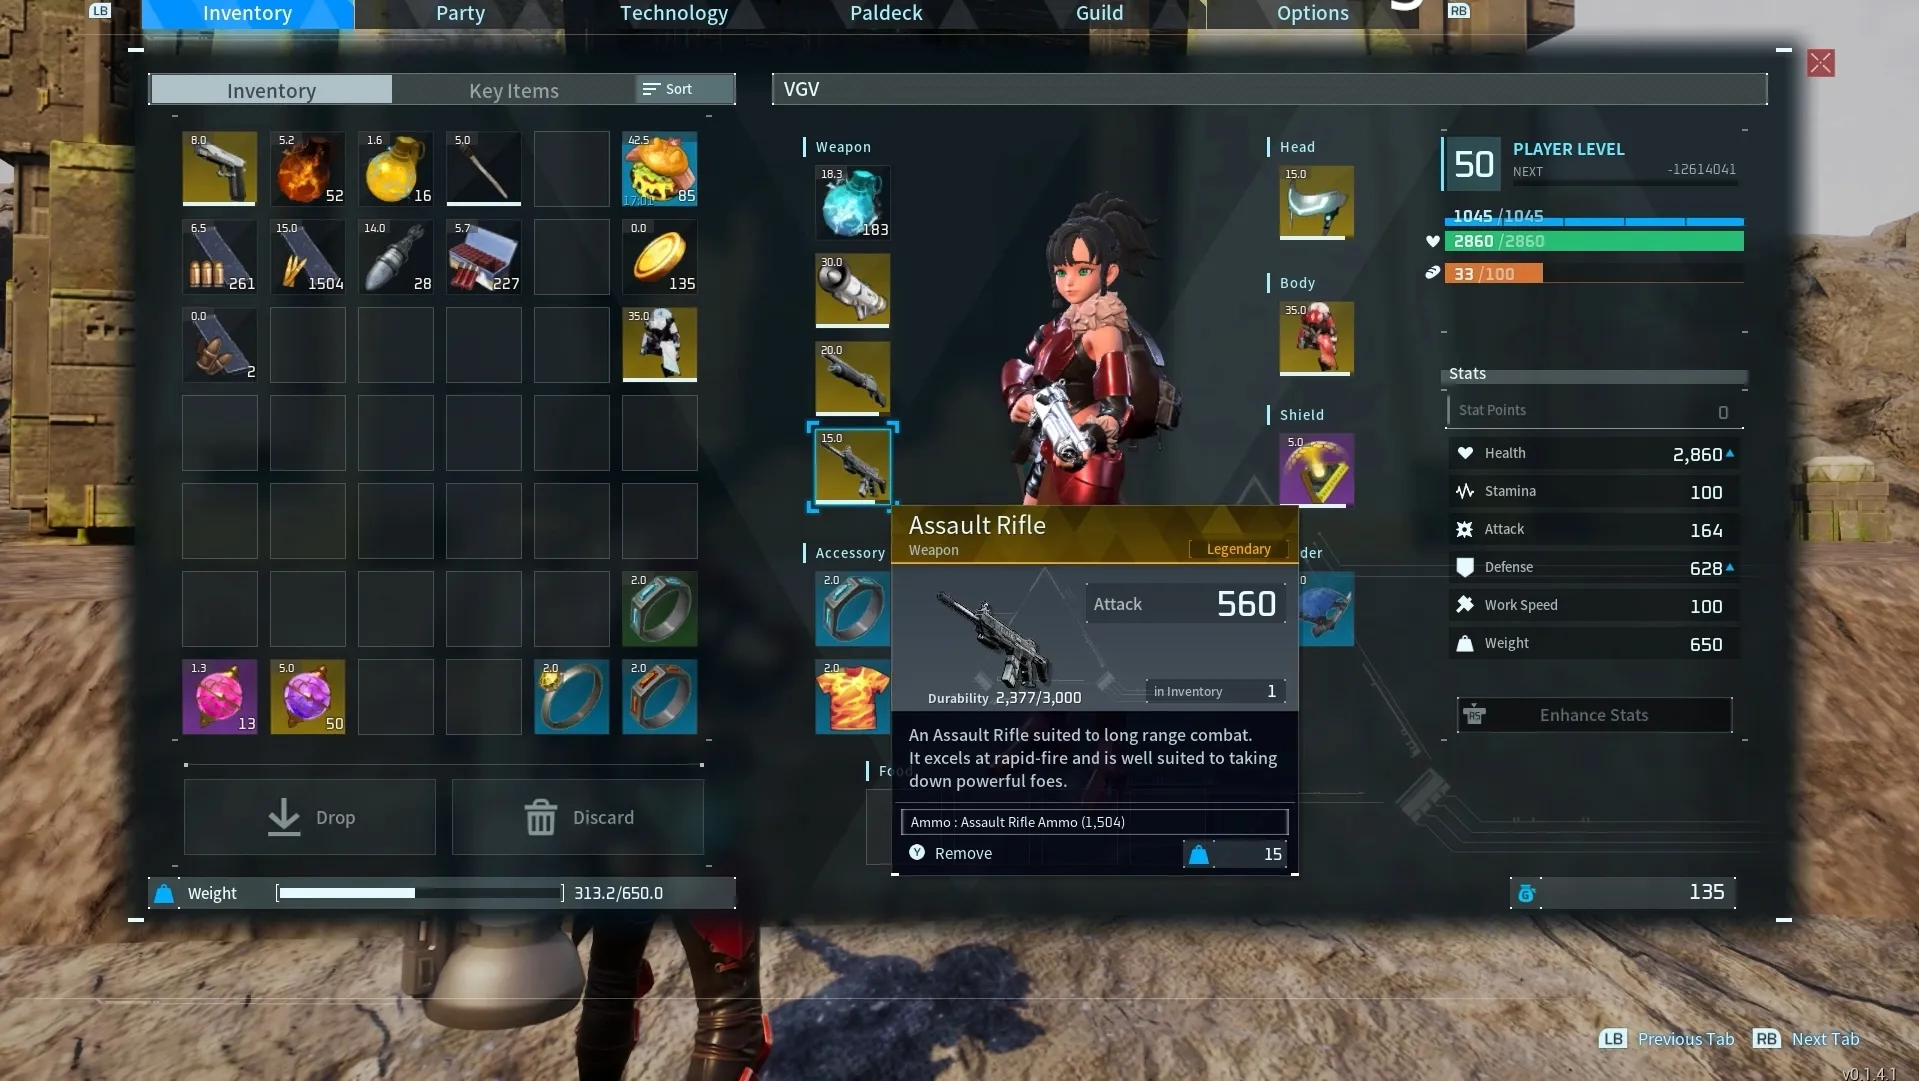 Character inventory in Palworld showcasing legendary Assault Rifle